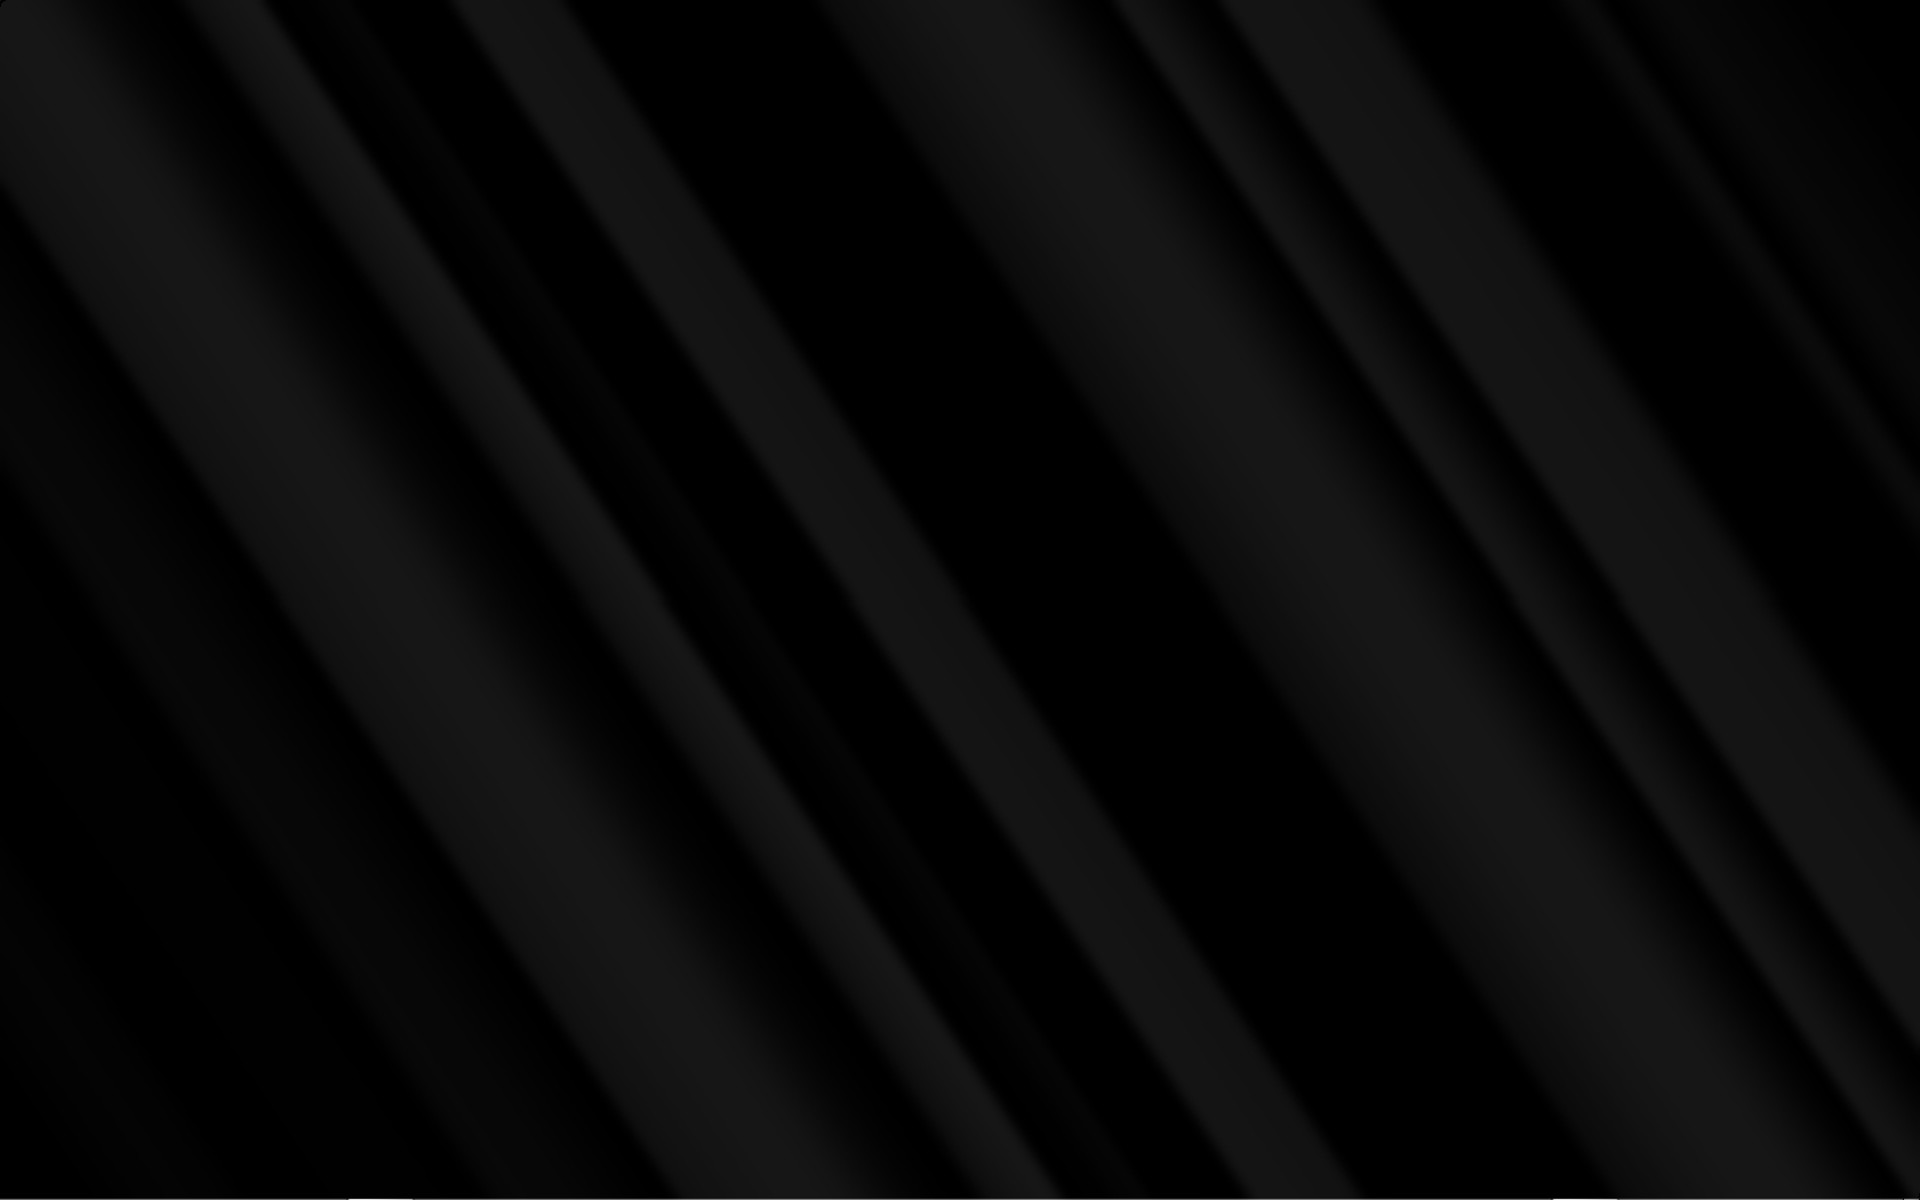 Plain Black Wallpaper For Android As Wallpaper Hd - Glossy Black Glass  Background - 1920x1200 Wallpaper 